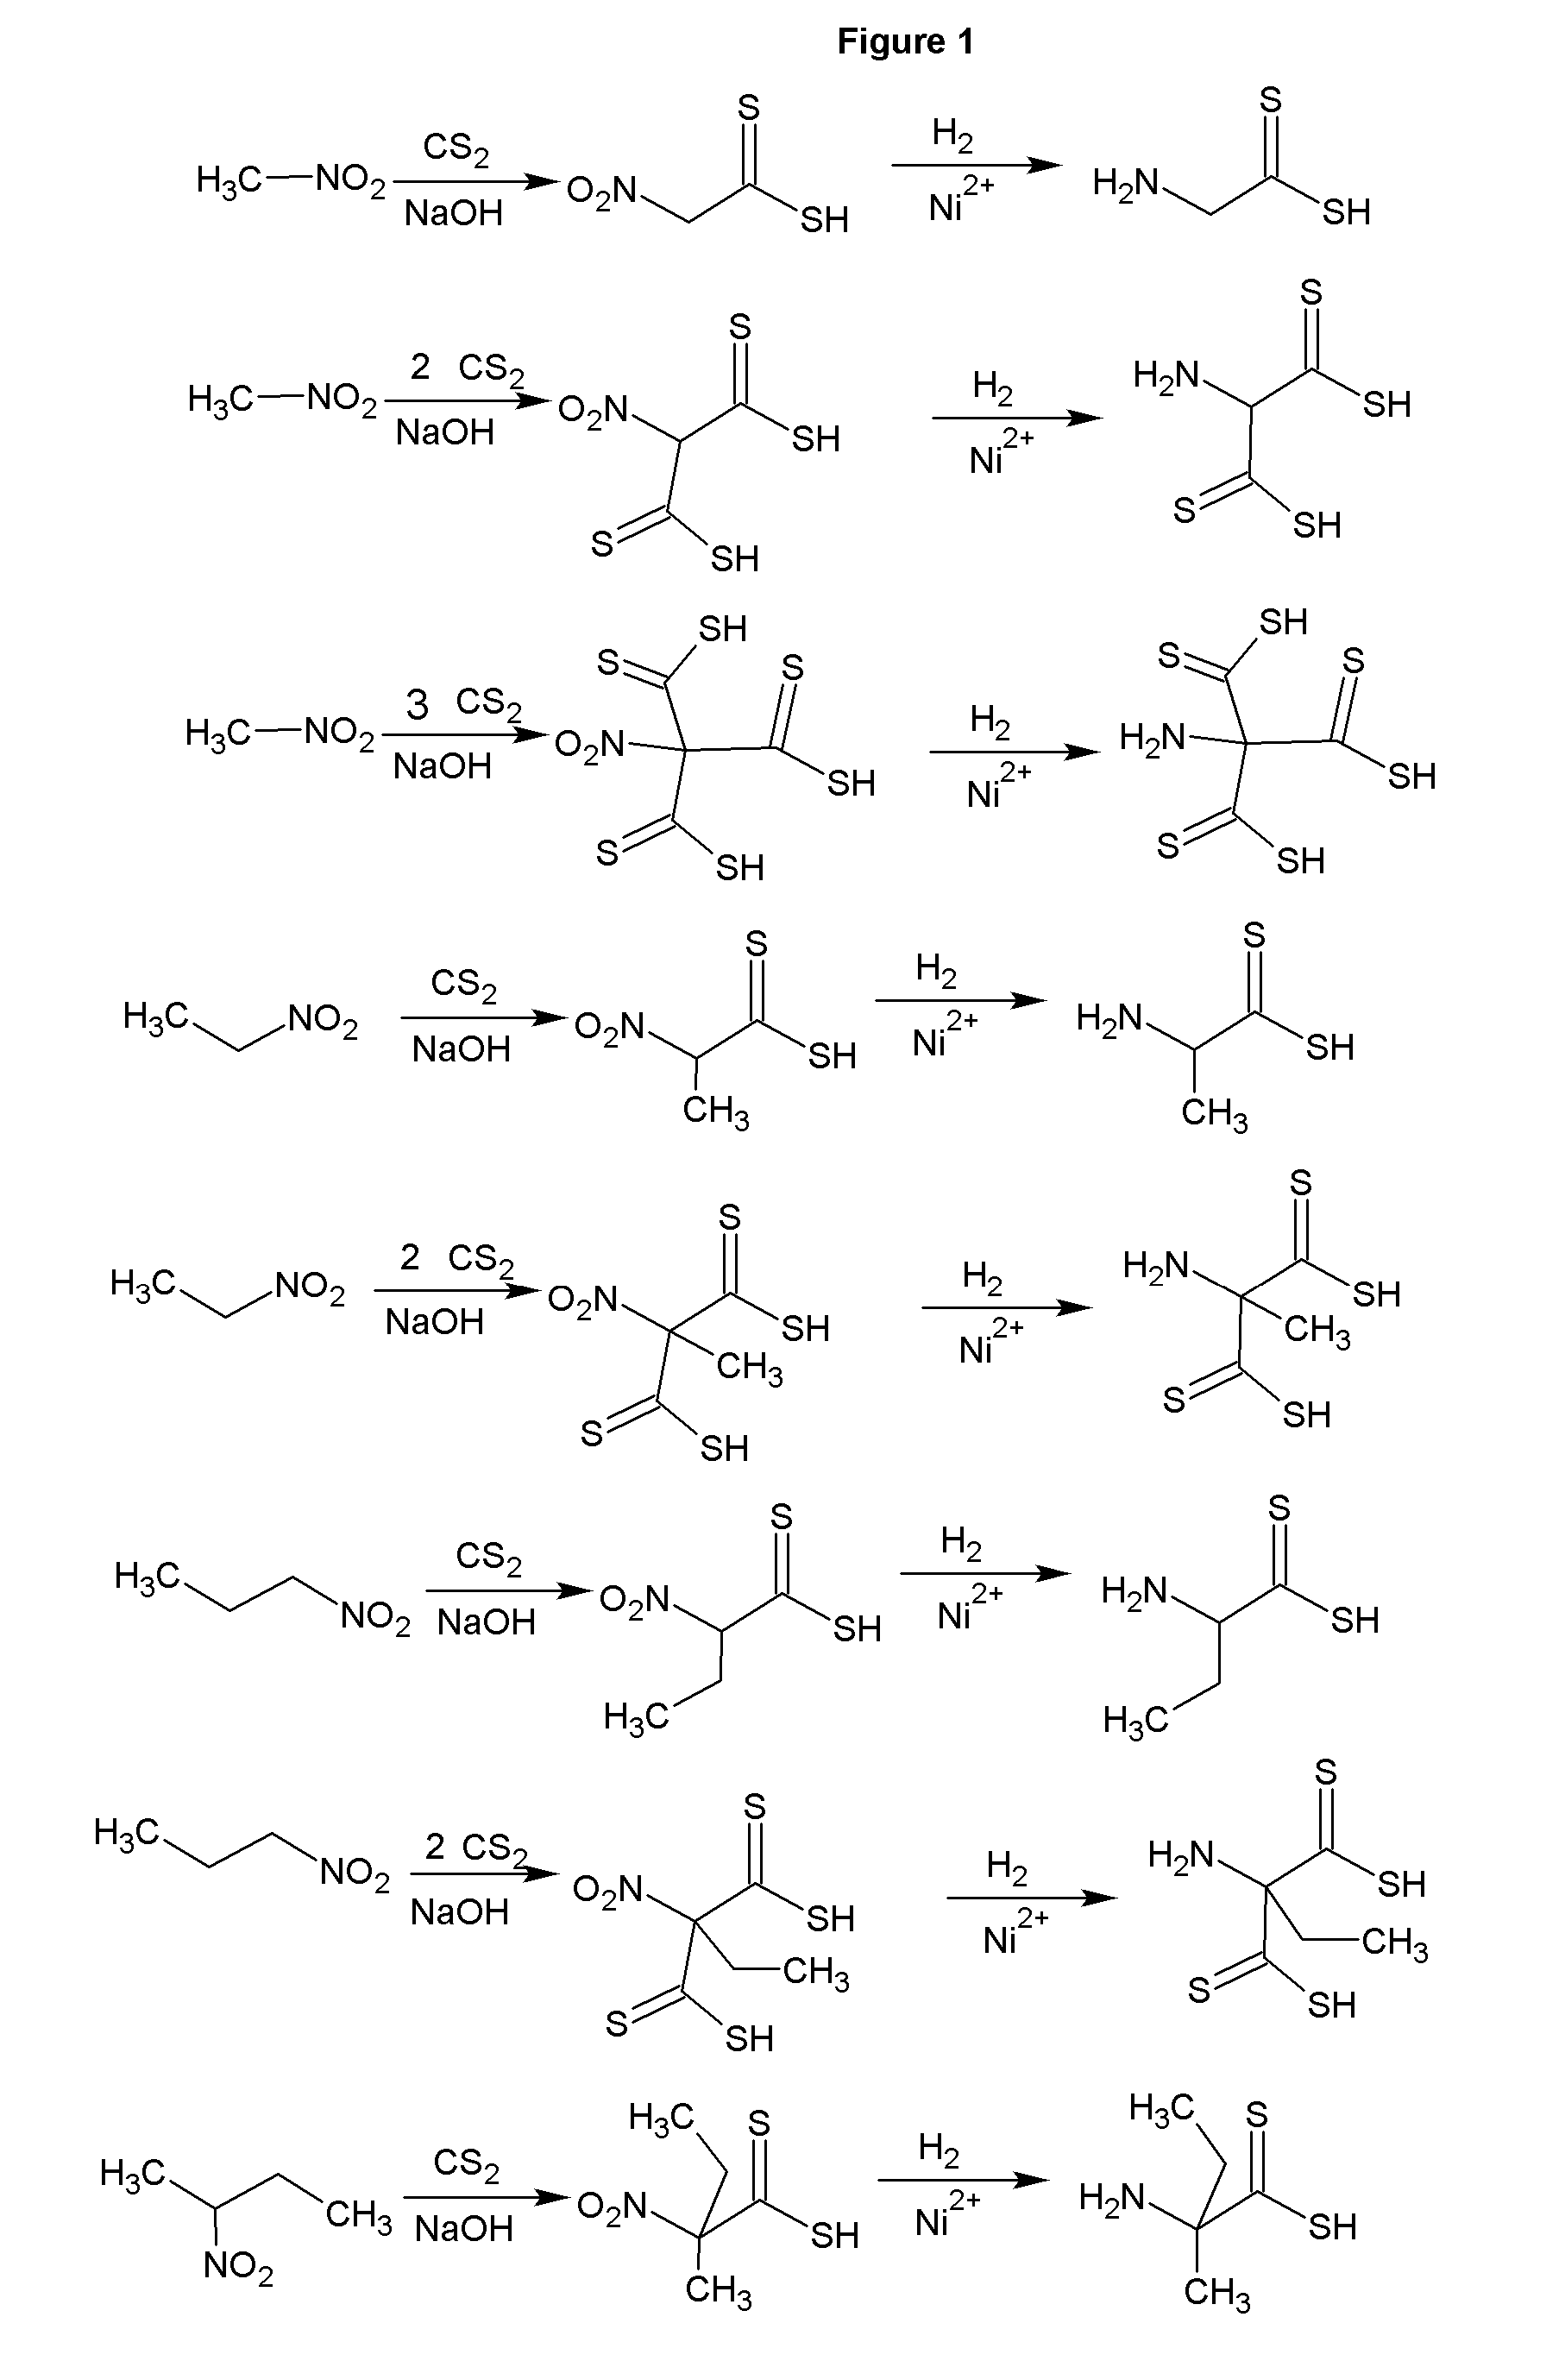 Carbondisulfide derived zwitterions